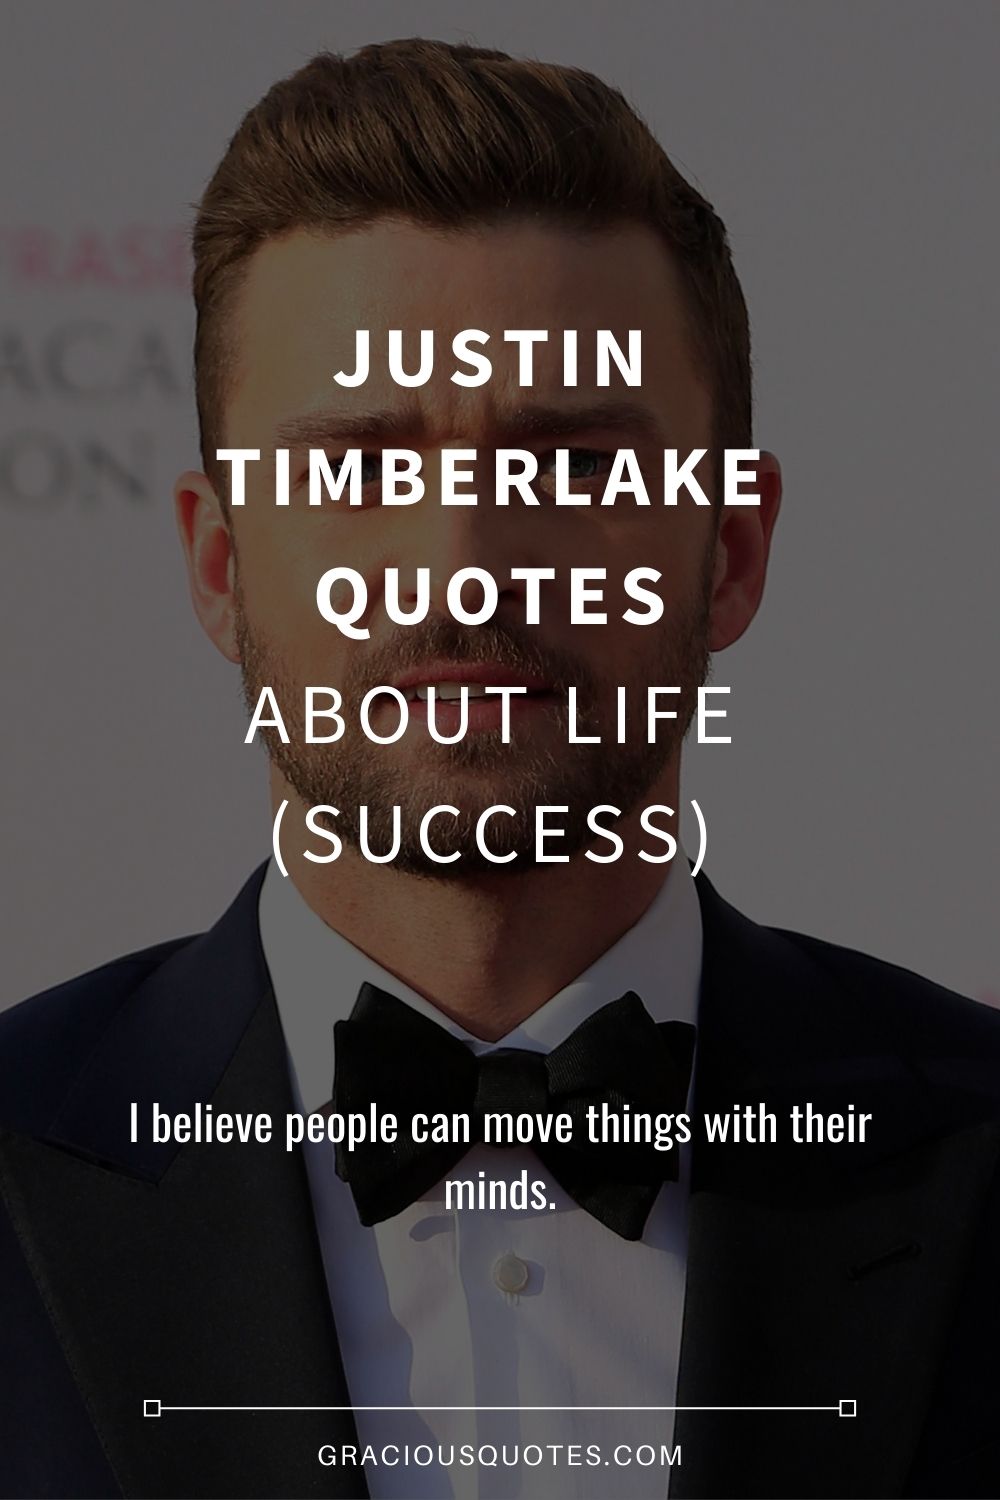 Justin Timberlake Quotes About Life (SUCCESS) - Gracious Quotes